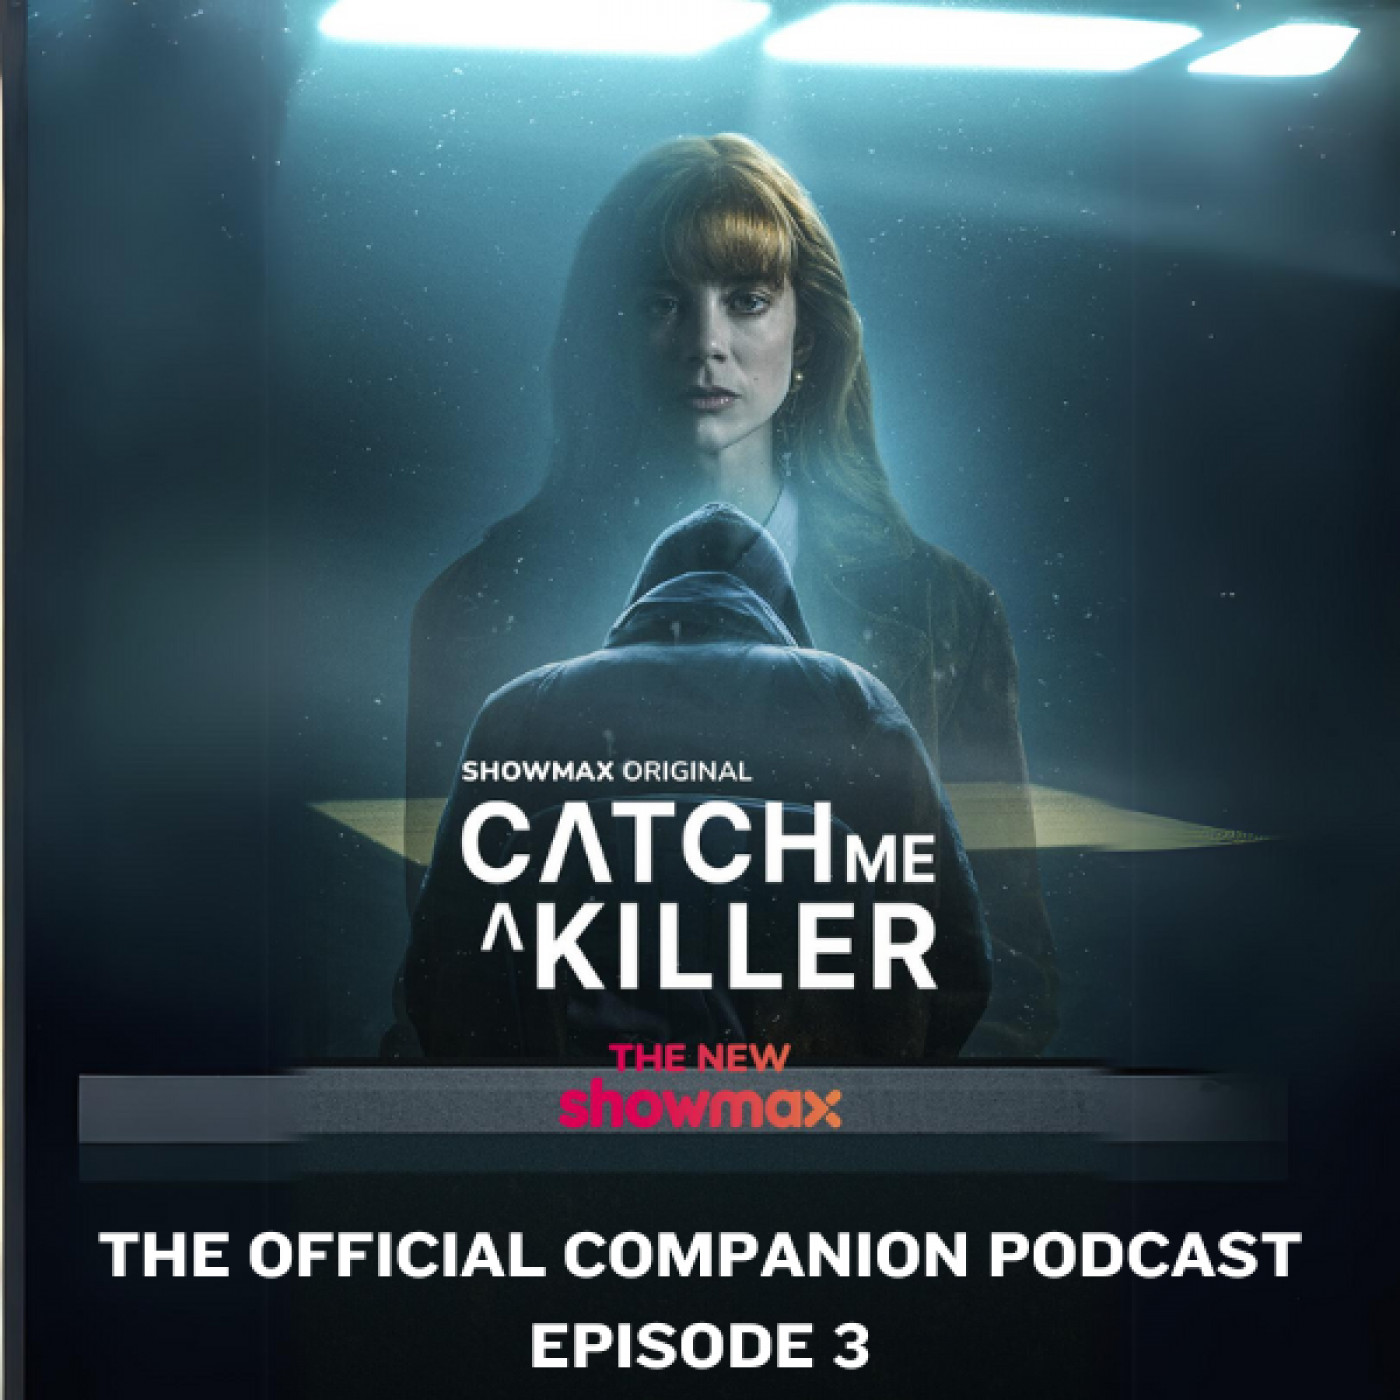 Catch Me A Killer: Official Companion Podcast Brought to you by Showmax (Episode 3)